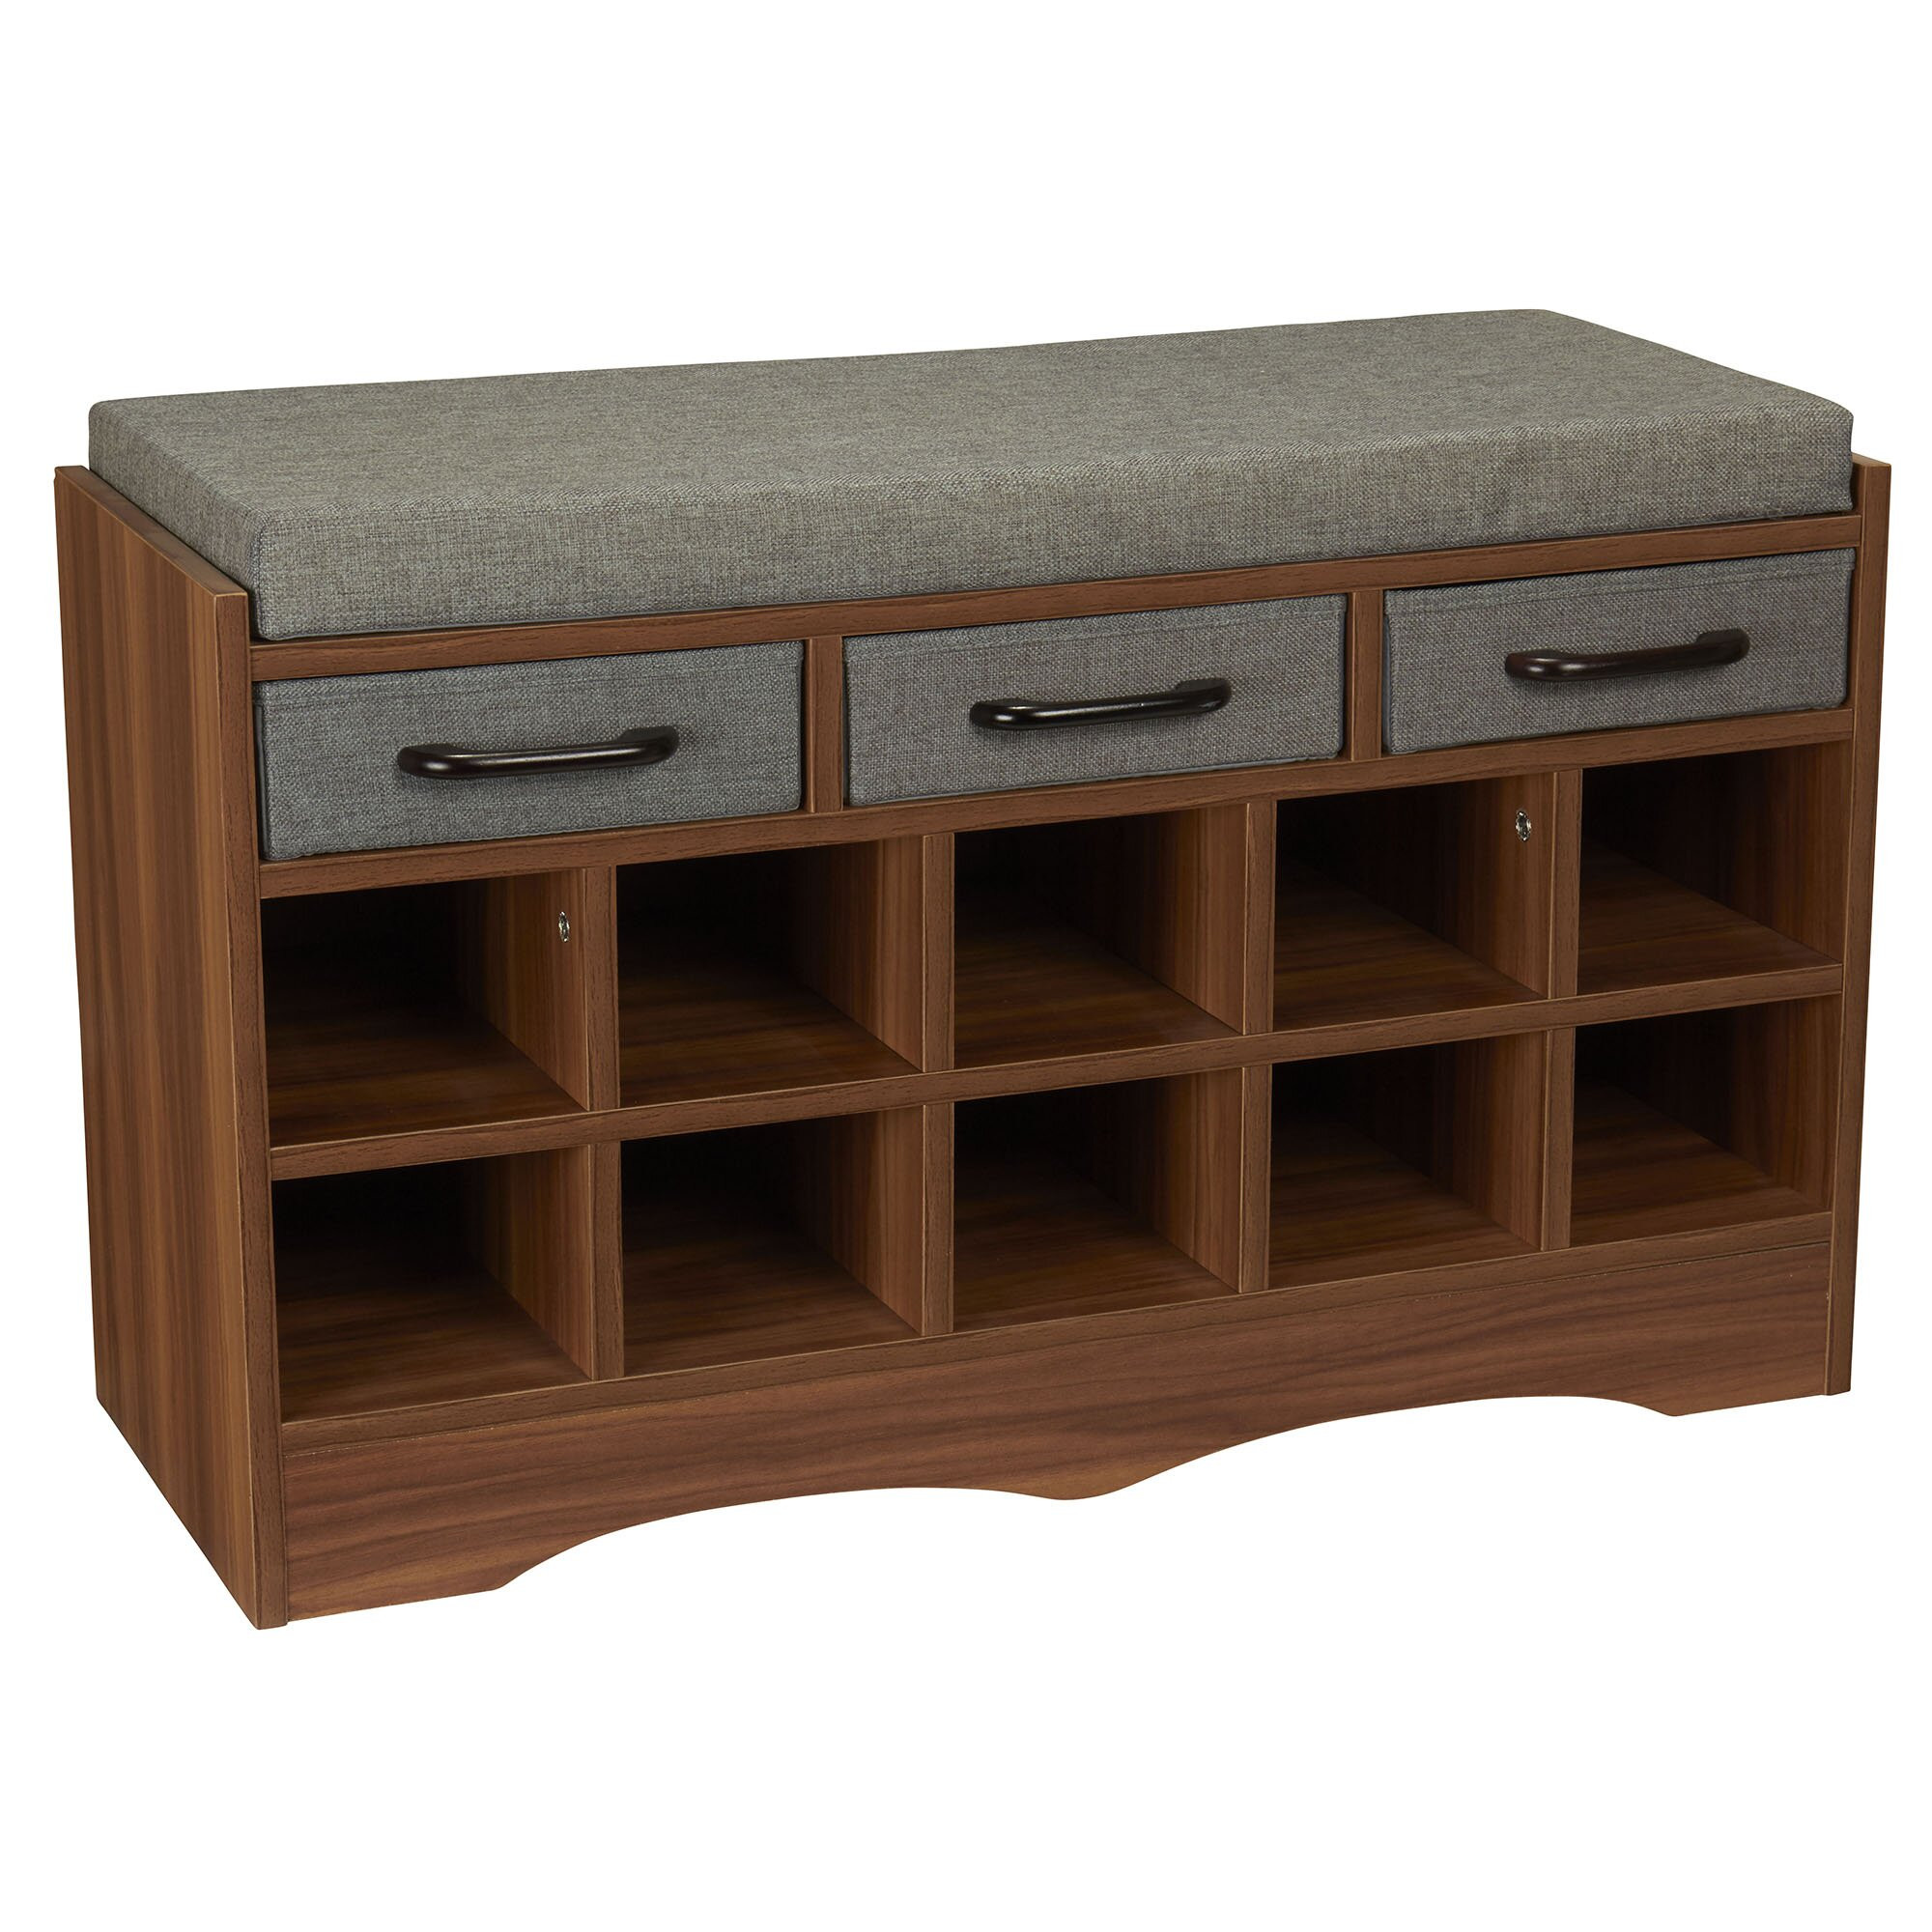 Bench With Shoe Storage
 Household Essentials Entryway Shoe Storage Bench & Reviews